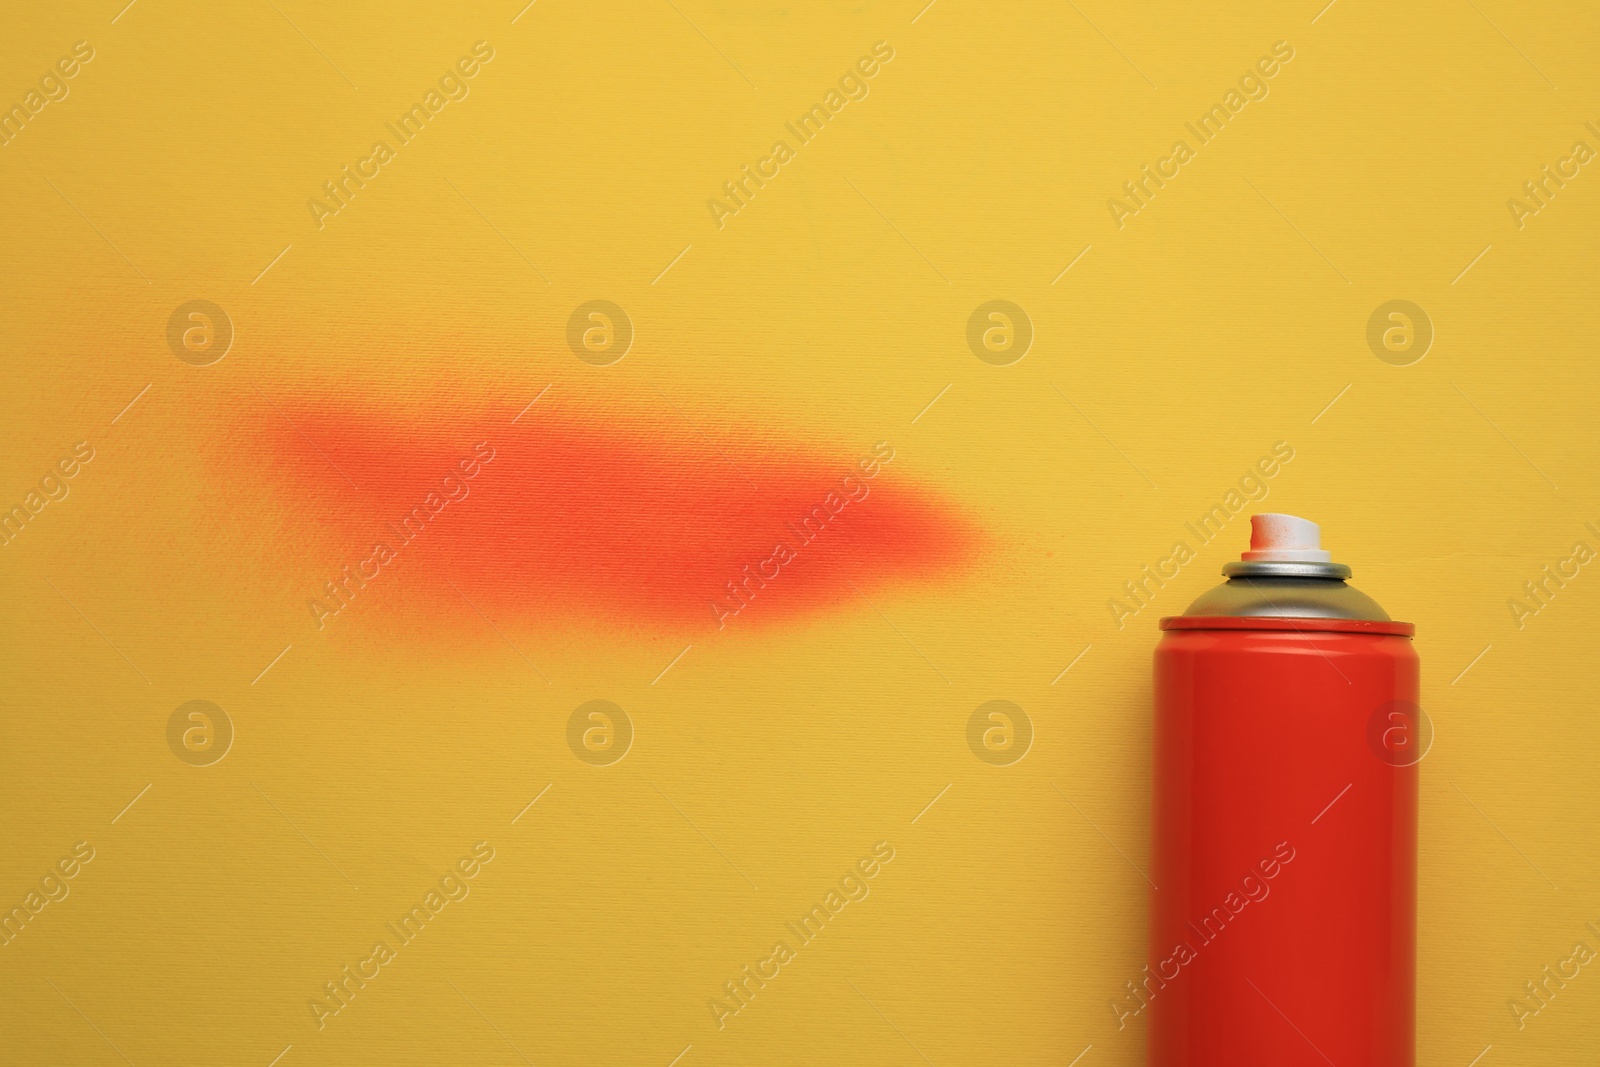 Photo of Can of red graffiti paint and sprayed dye sample on yellow background, top view